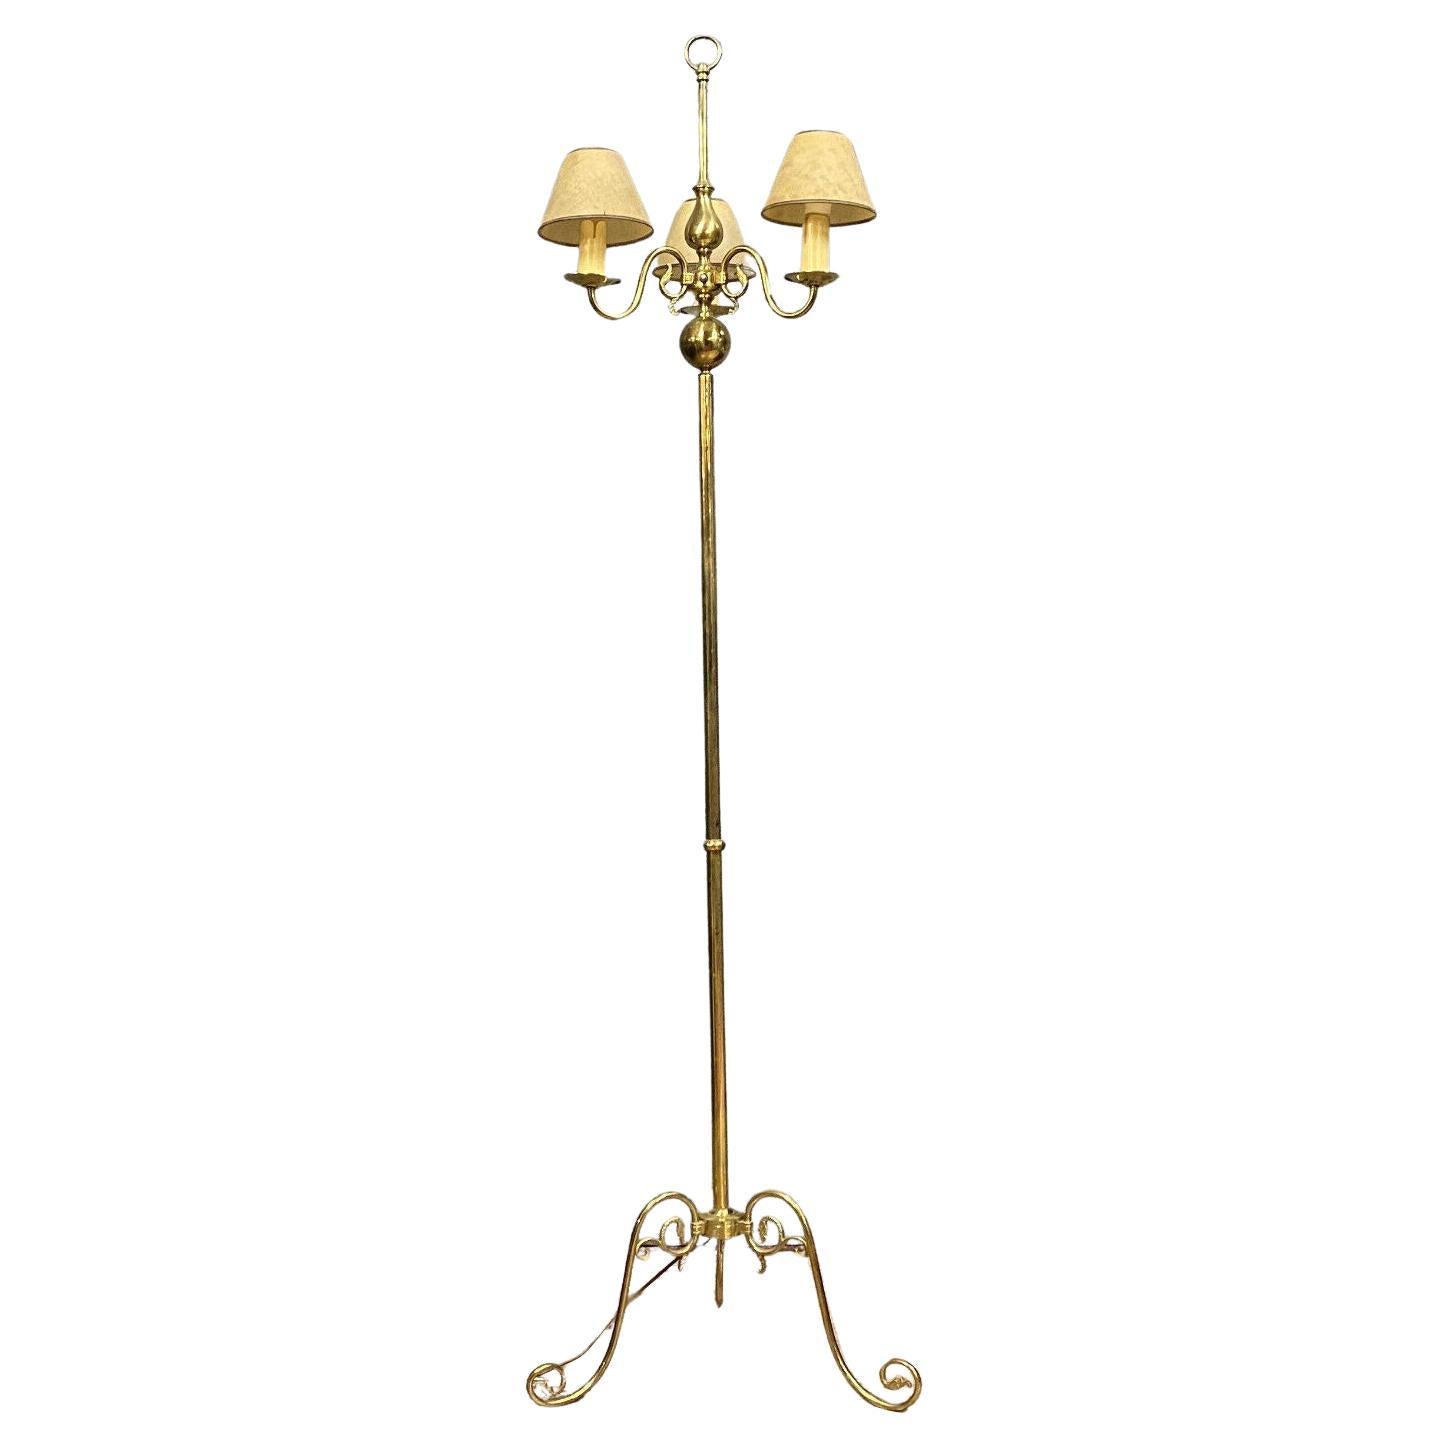 Grand Neo-Classical Floor Lamp by Lucien Gau -1X46 For Sale